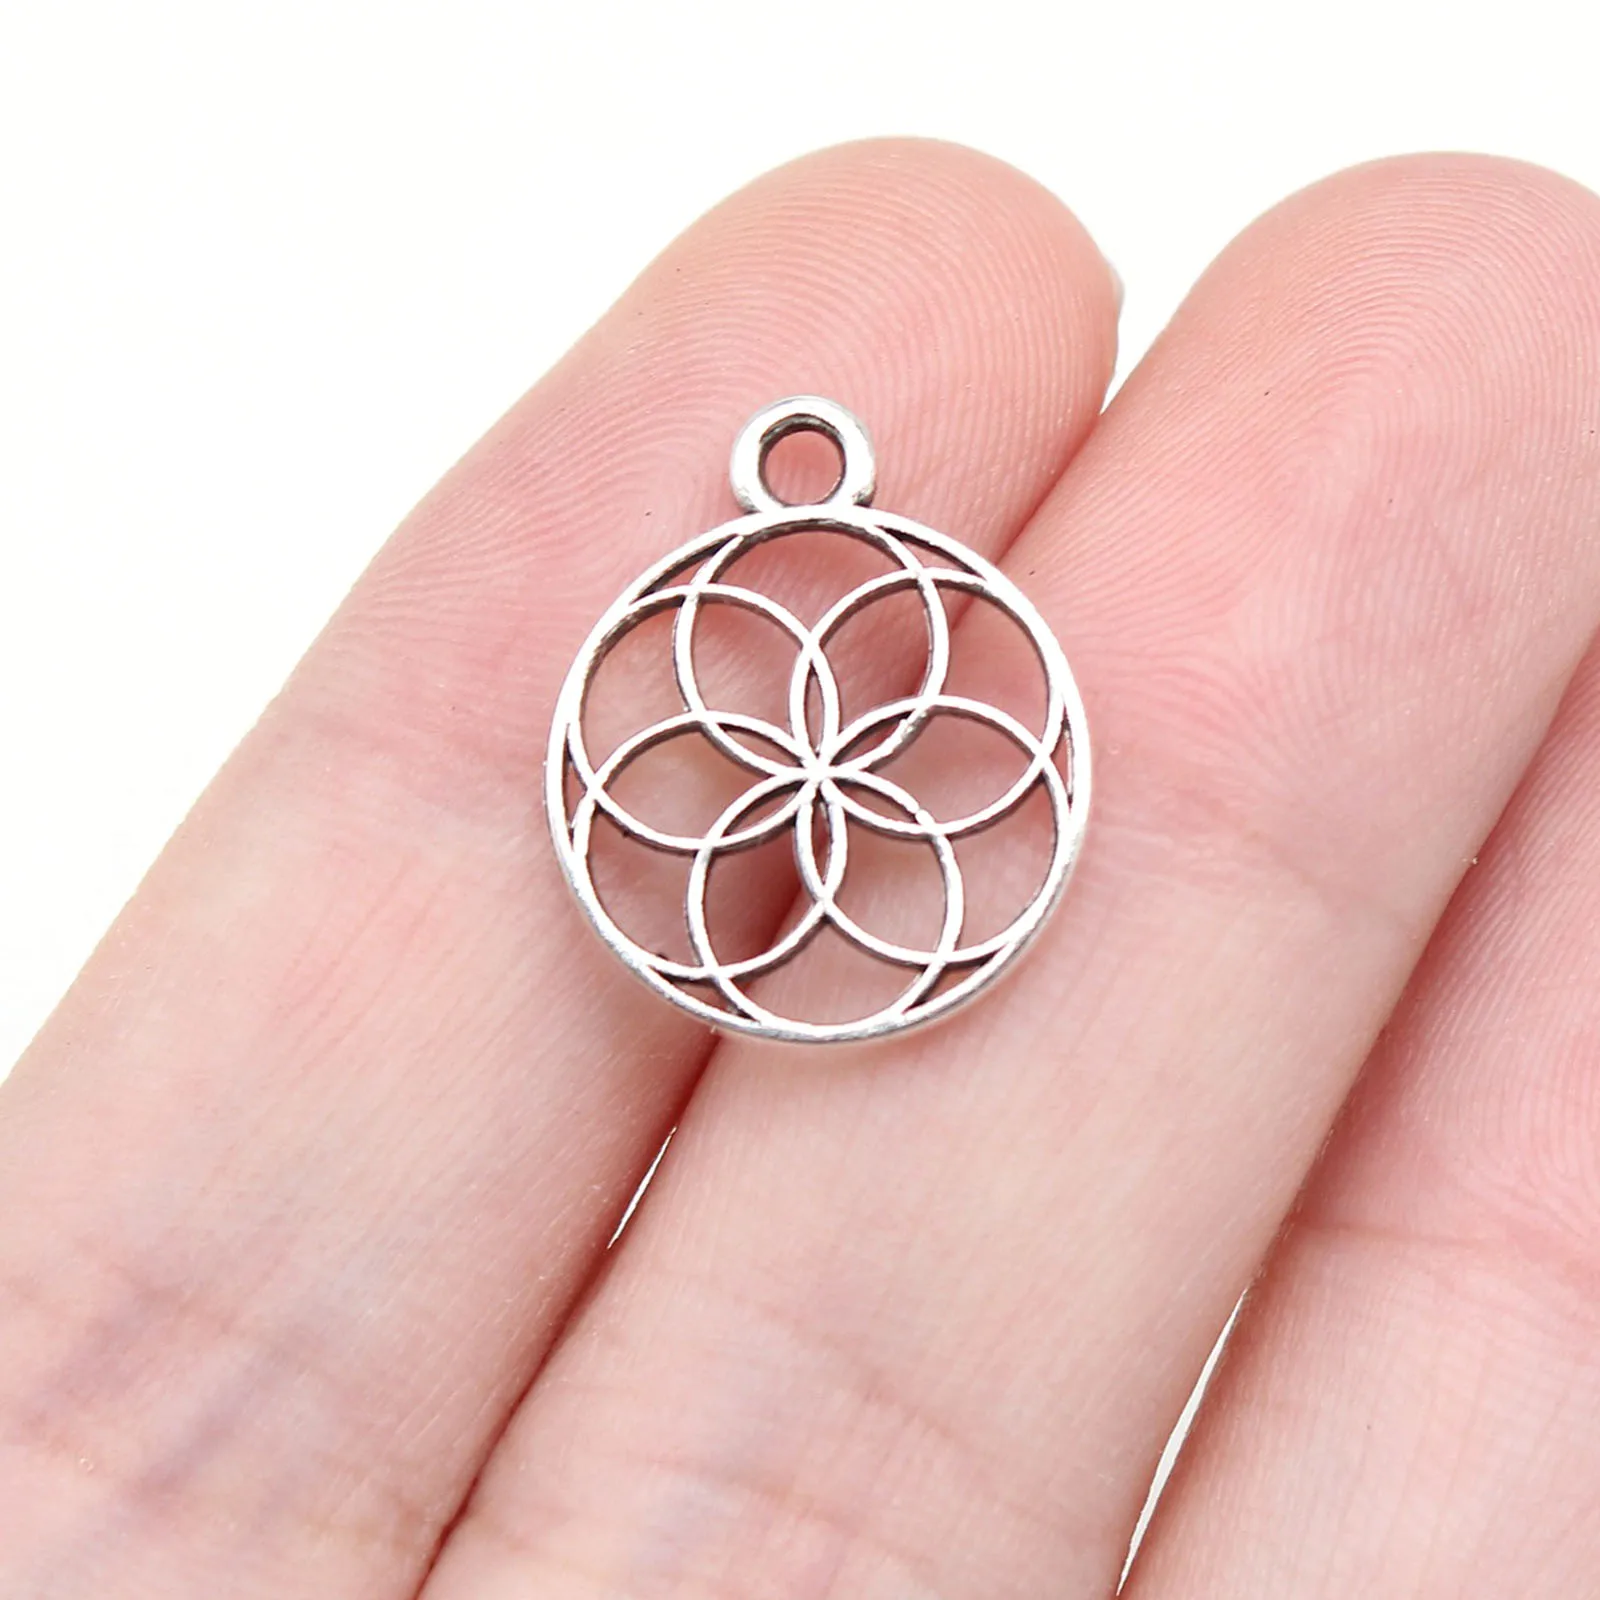 

30Pcs 17x14mm Zinc Alloy Silver Color Flower of Life Charms Pendants Jewelry Making DIY Jewelry Findings Accessories Wholesale